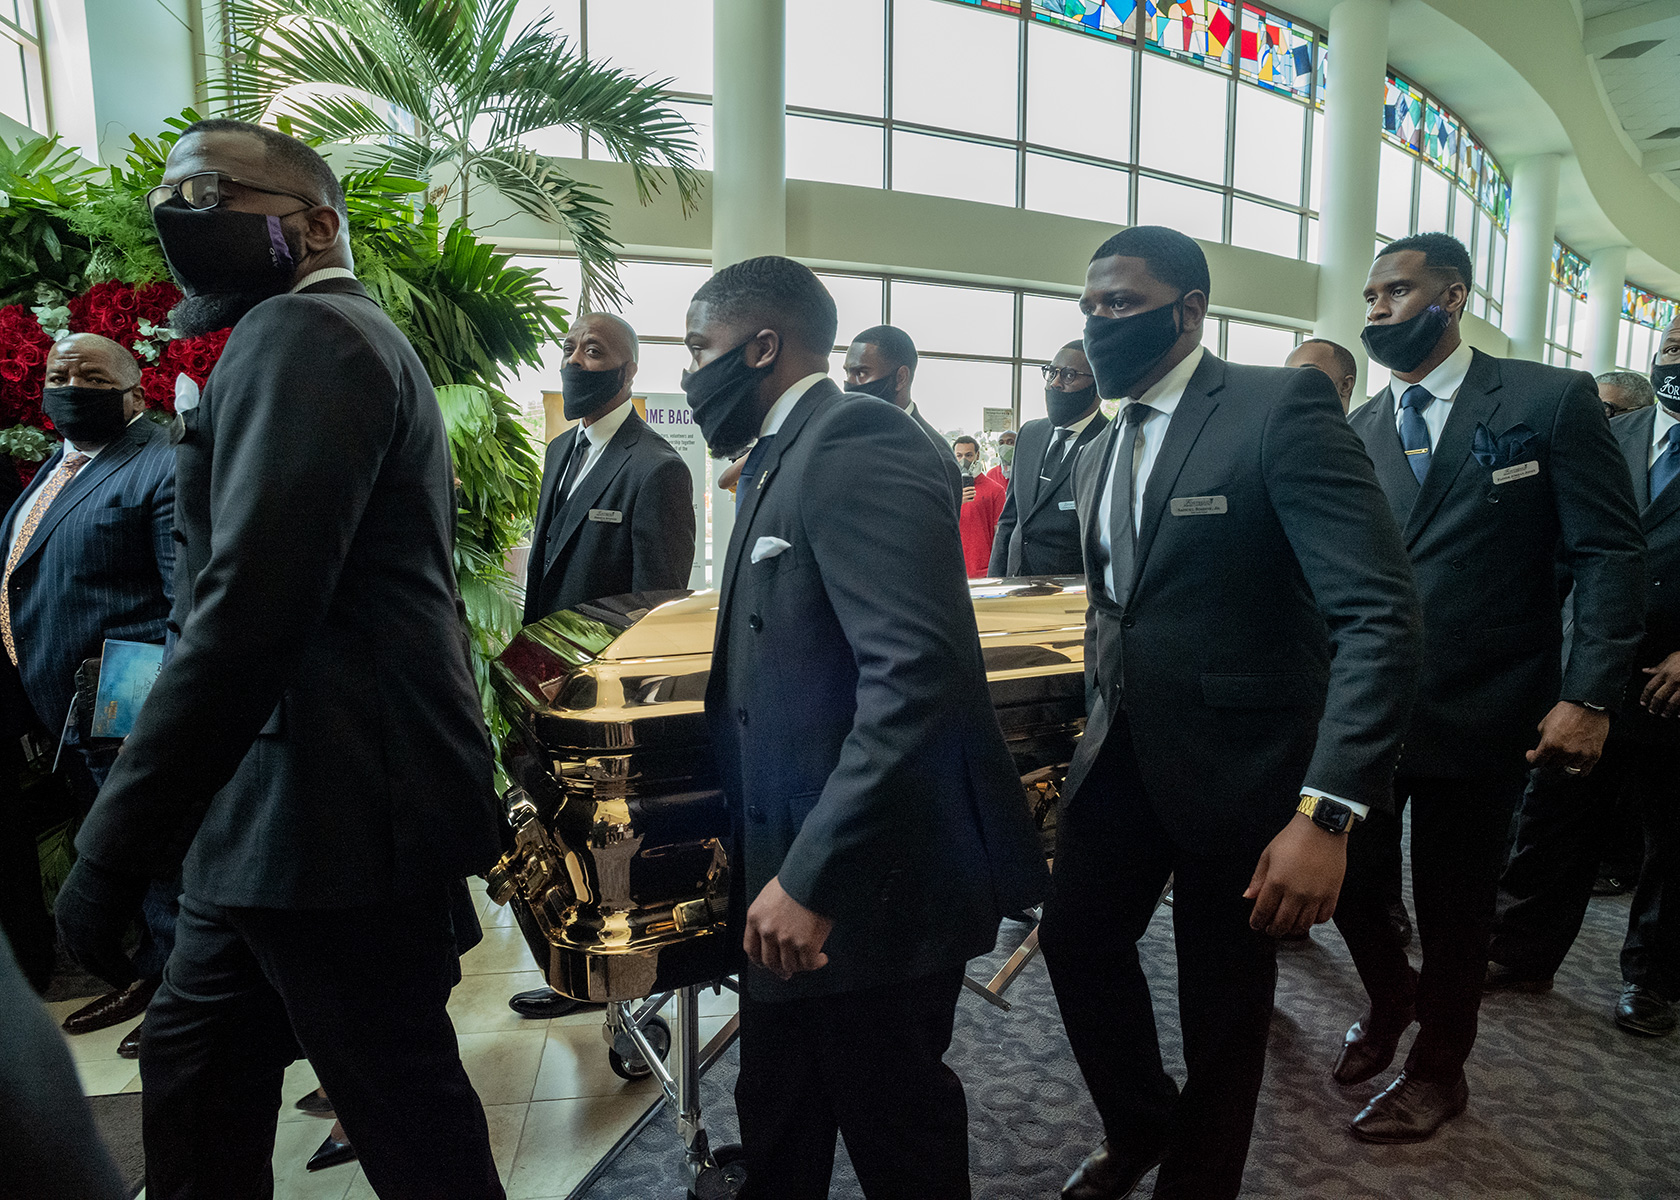 Pallbearers transport George Floyd's casket at The Fountain of Praise Church on June 9. (Ruddy Roye for TIME)